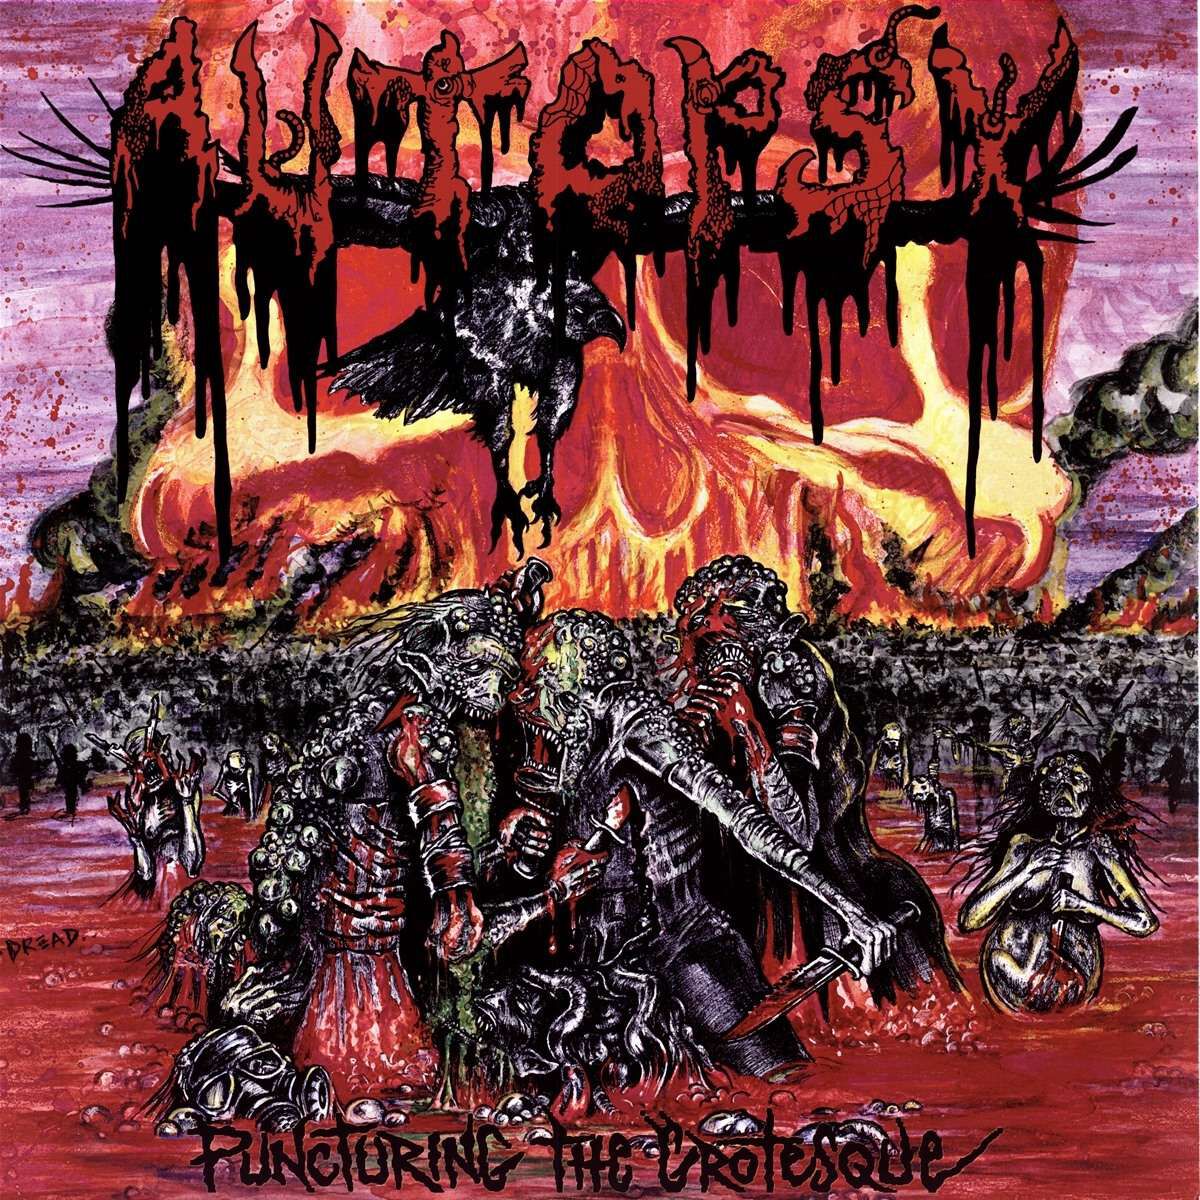 Levně Autopsy Puncturing the grotesque CD standard